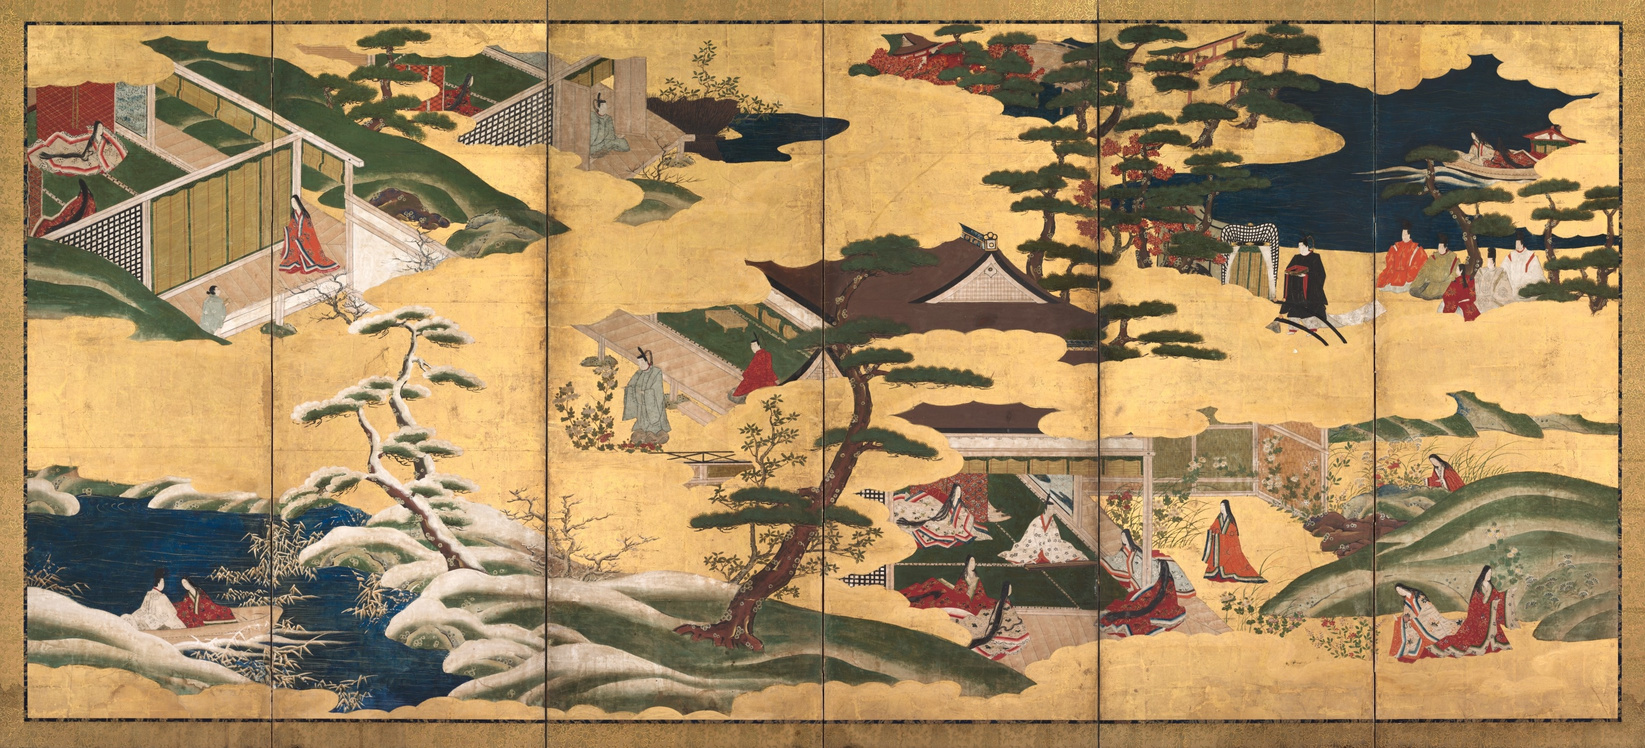 Scenes from the Tale of Genji, courtesy of the Cleveland Museum of Art.